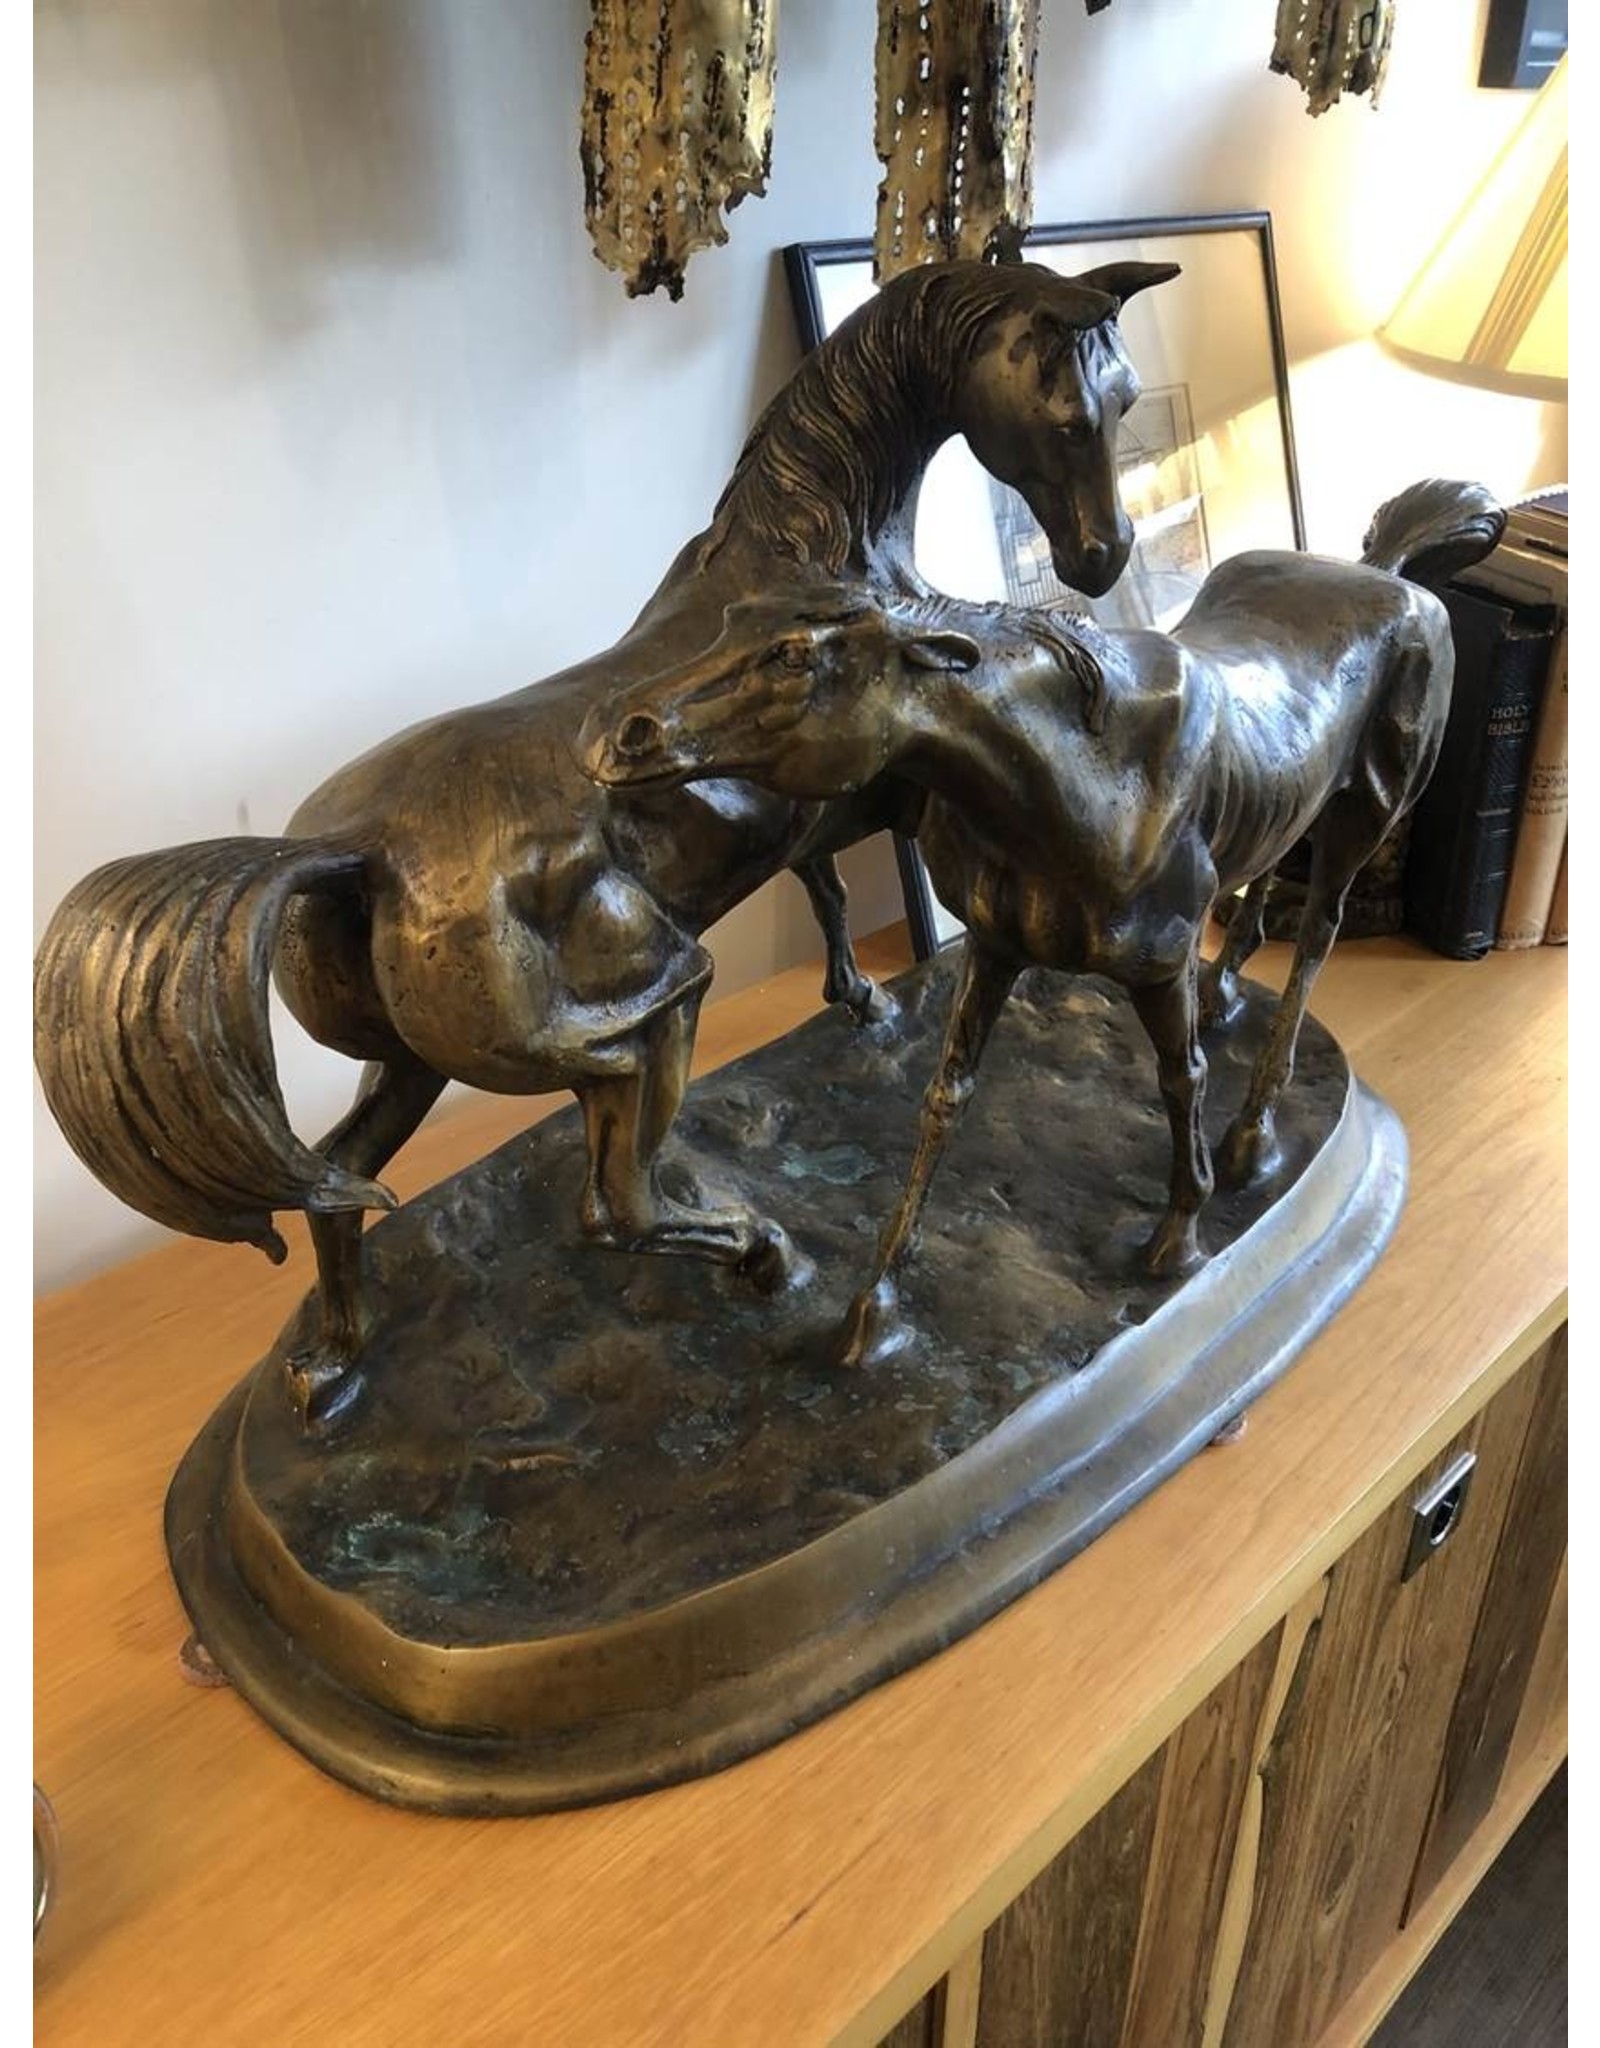 Bronze horses - copy or study of Pierre Jules Mêne "L'accolade", pair of stallions